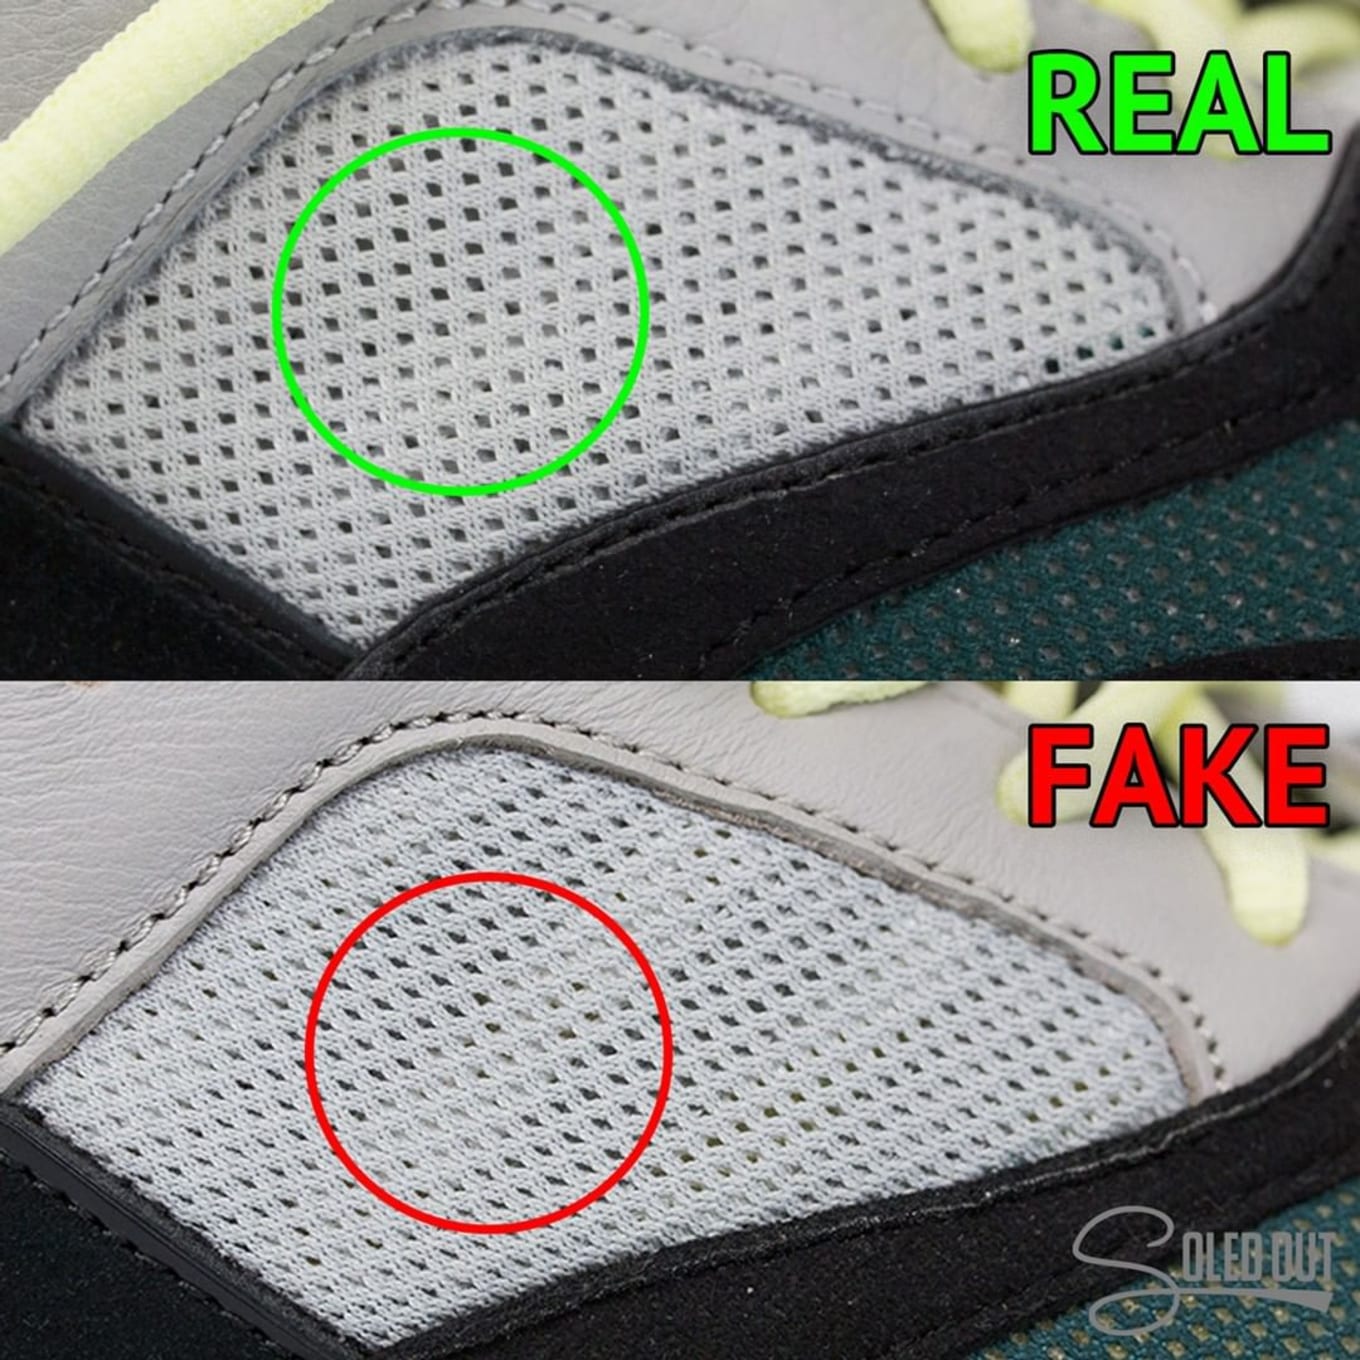 Adidas Yeezy Boost 700 Are Real or Fake 